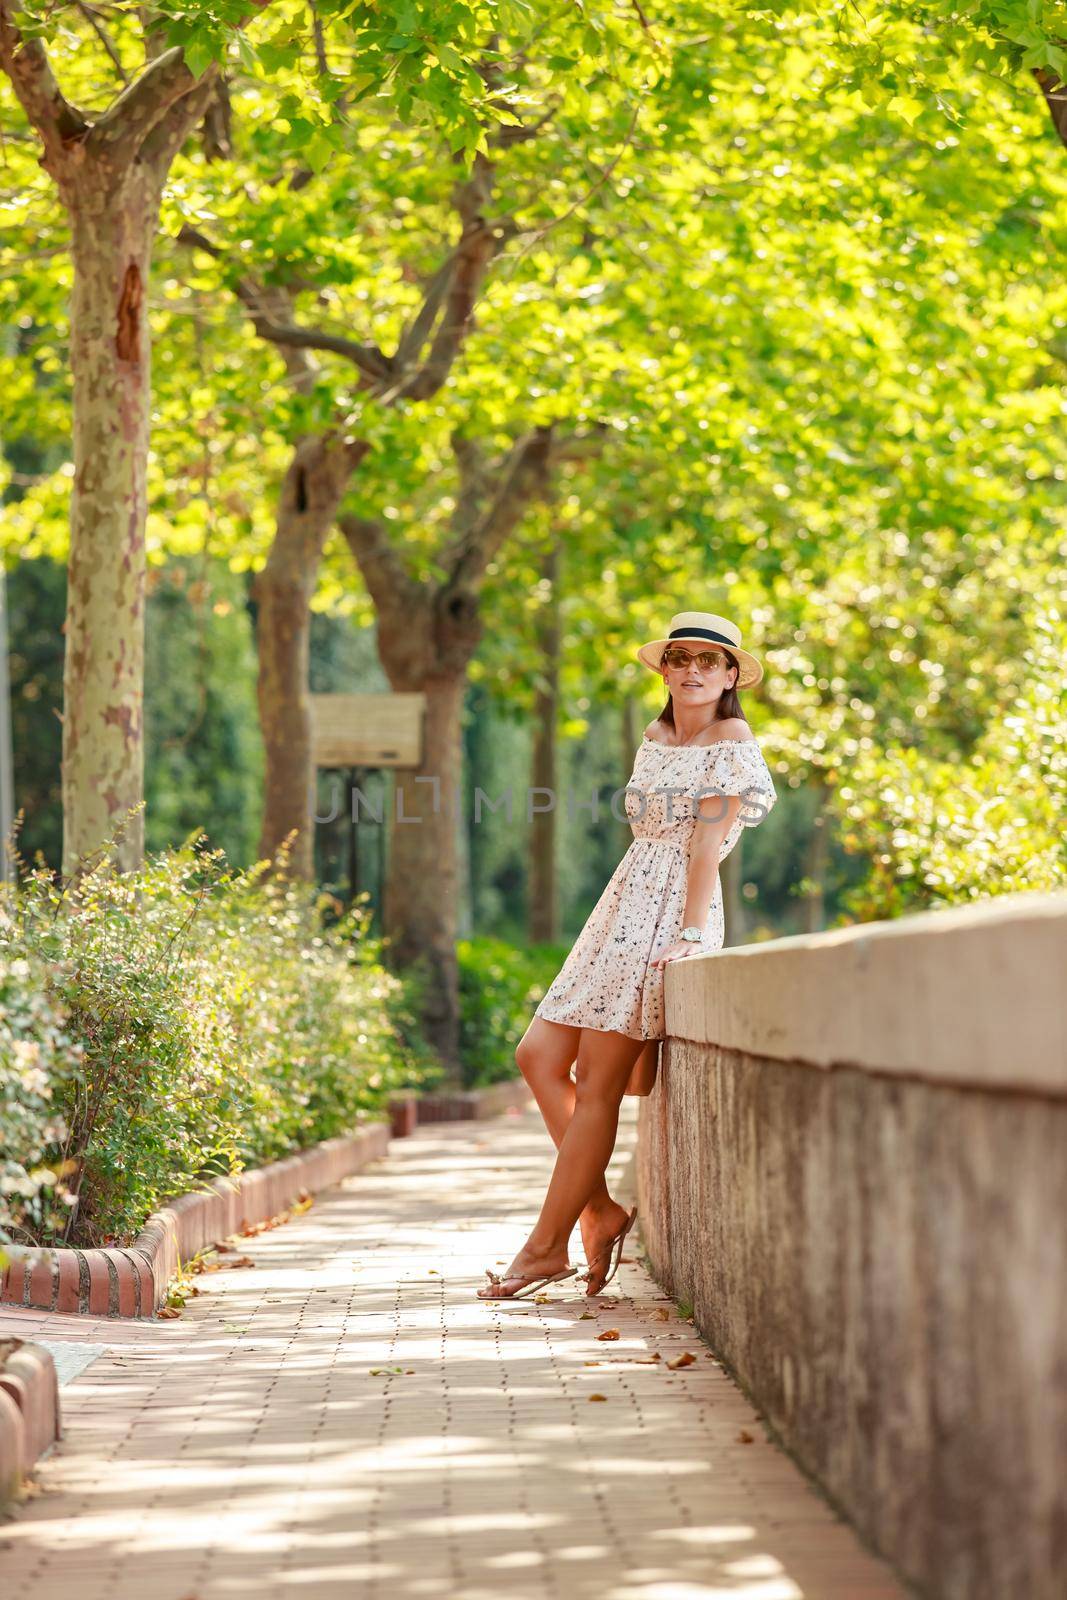 The bright beautiful girl in a light dress and hat walks along alley of trees in Monaco in sunny weather in the summer, handbag in hand. High quality photo